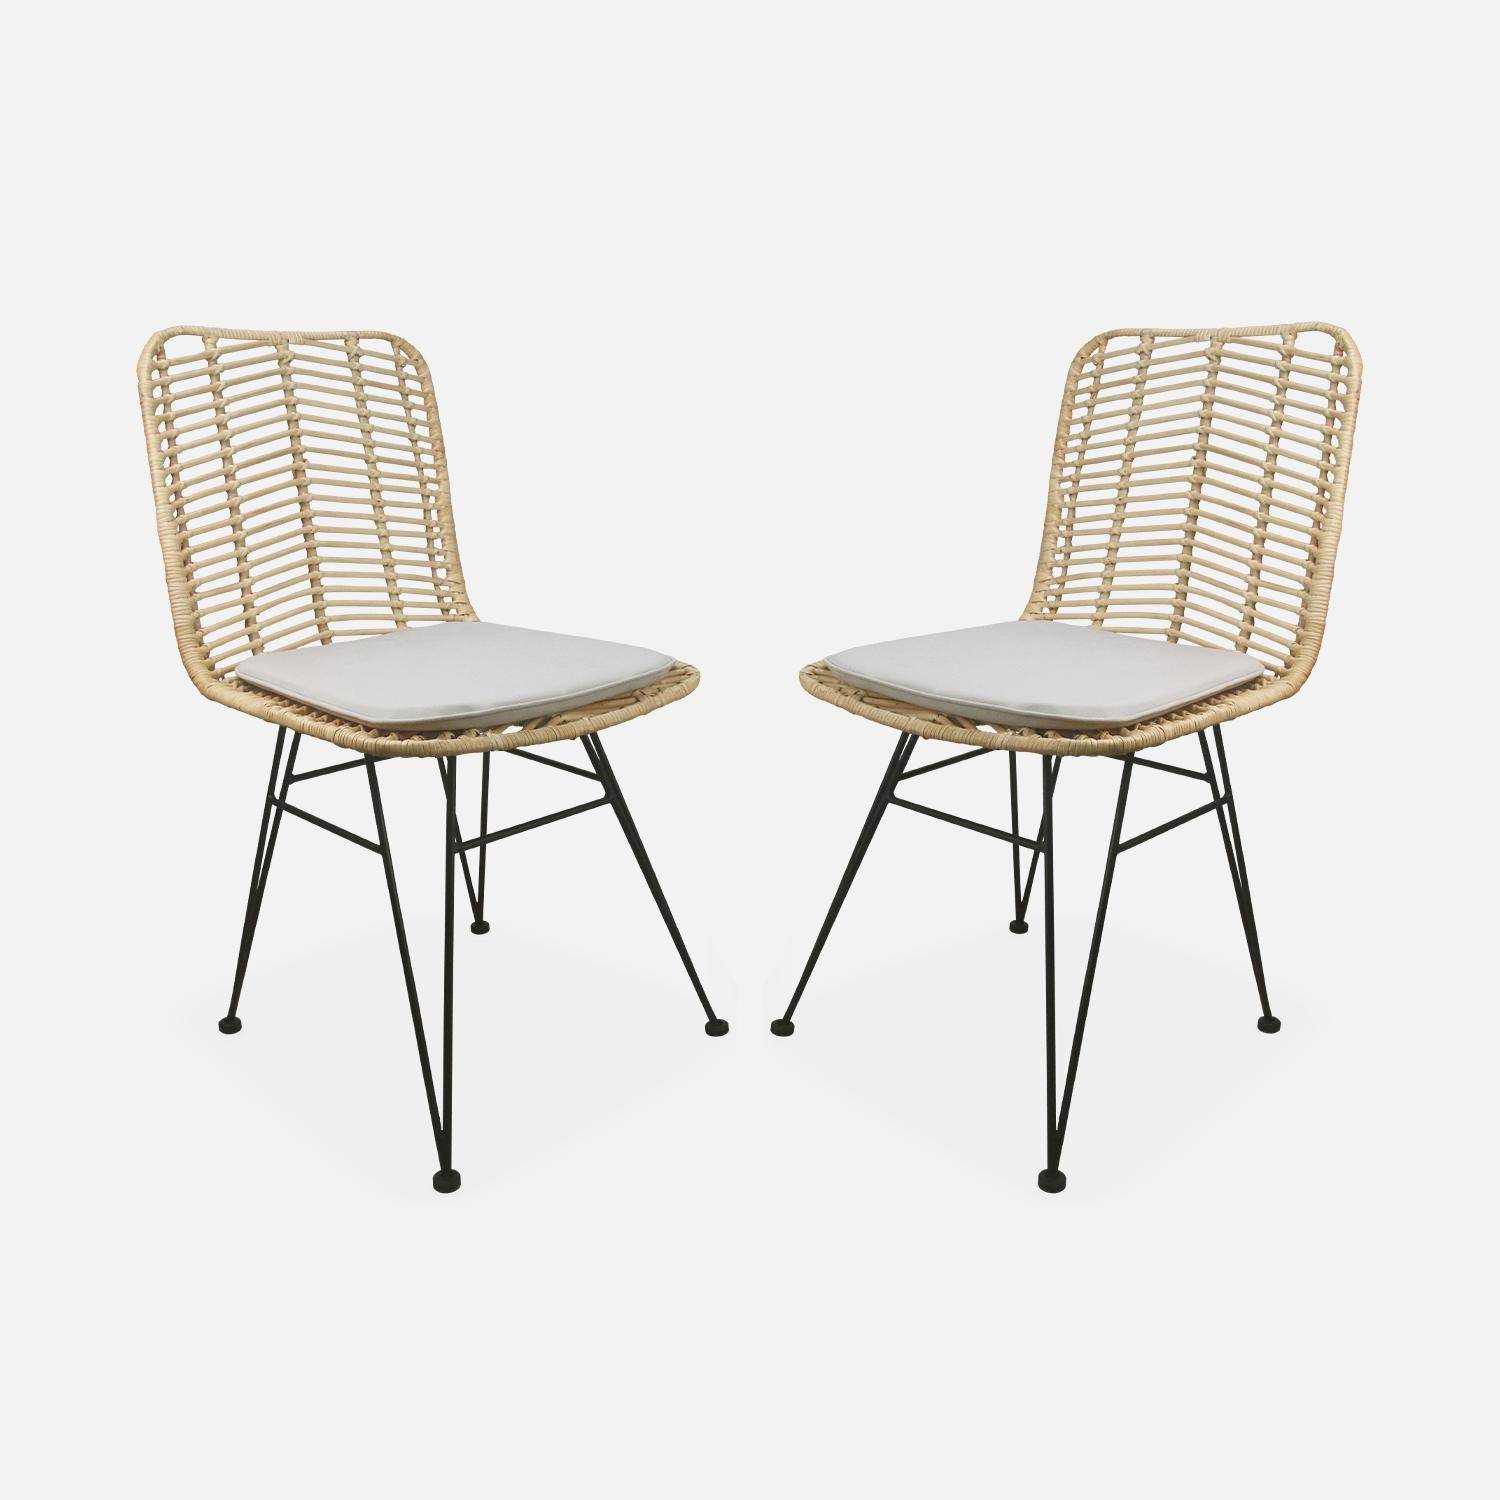 Pair of high-backed rattan dining chairs with metal legs and cushions - Cahya - Natural rattan, White cushions Photo4